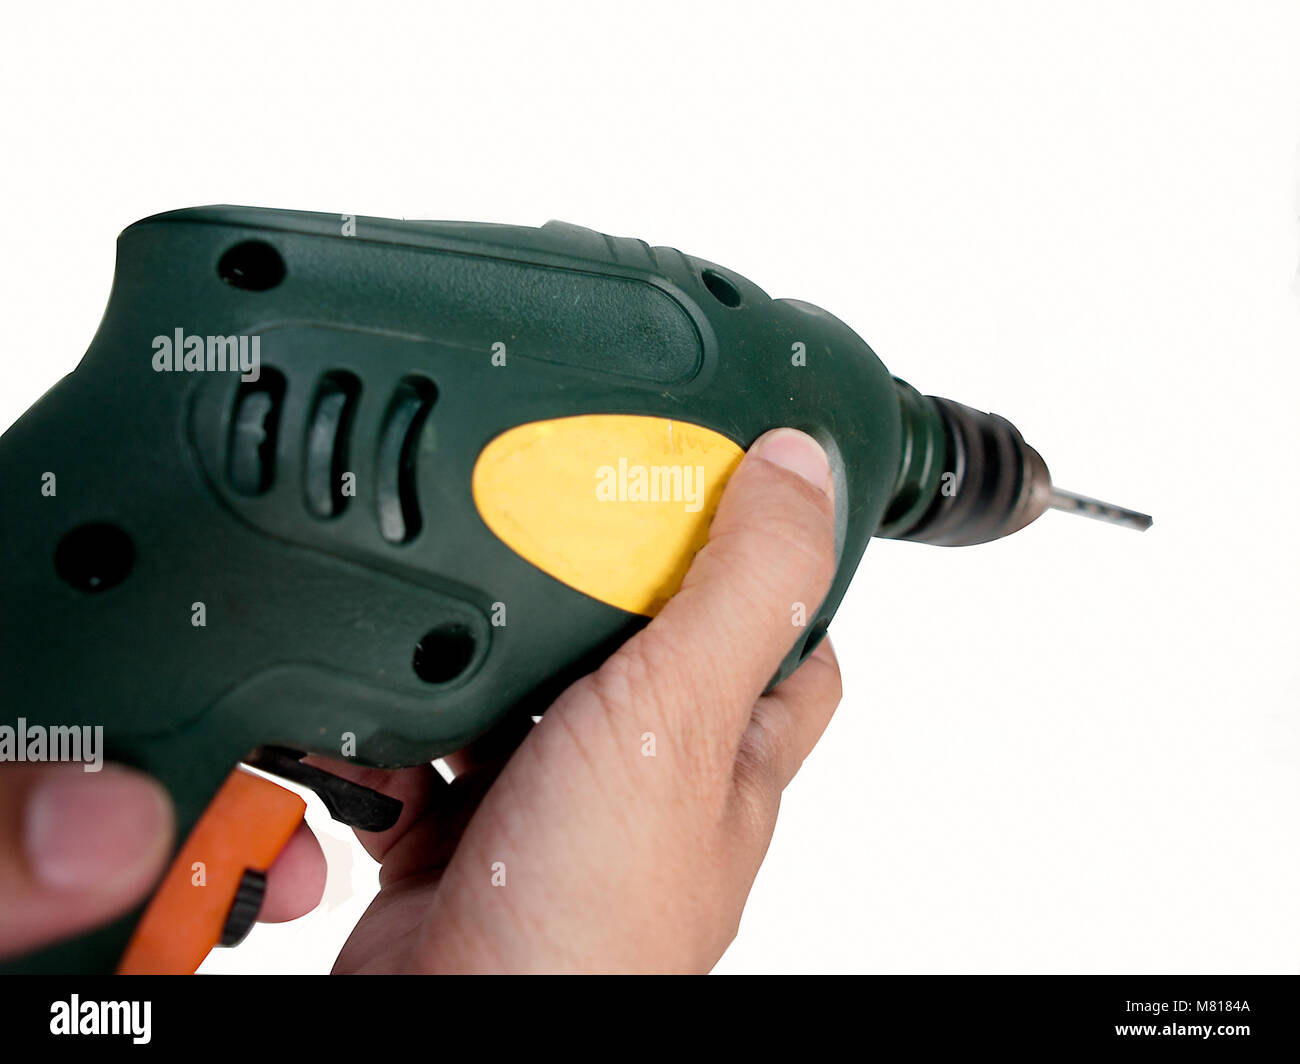 https://c8.alamy.com/comp/M8184A/electric-drill-tool-engineering-industry-M8184A.jpg